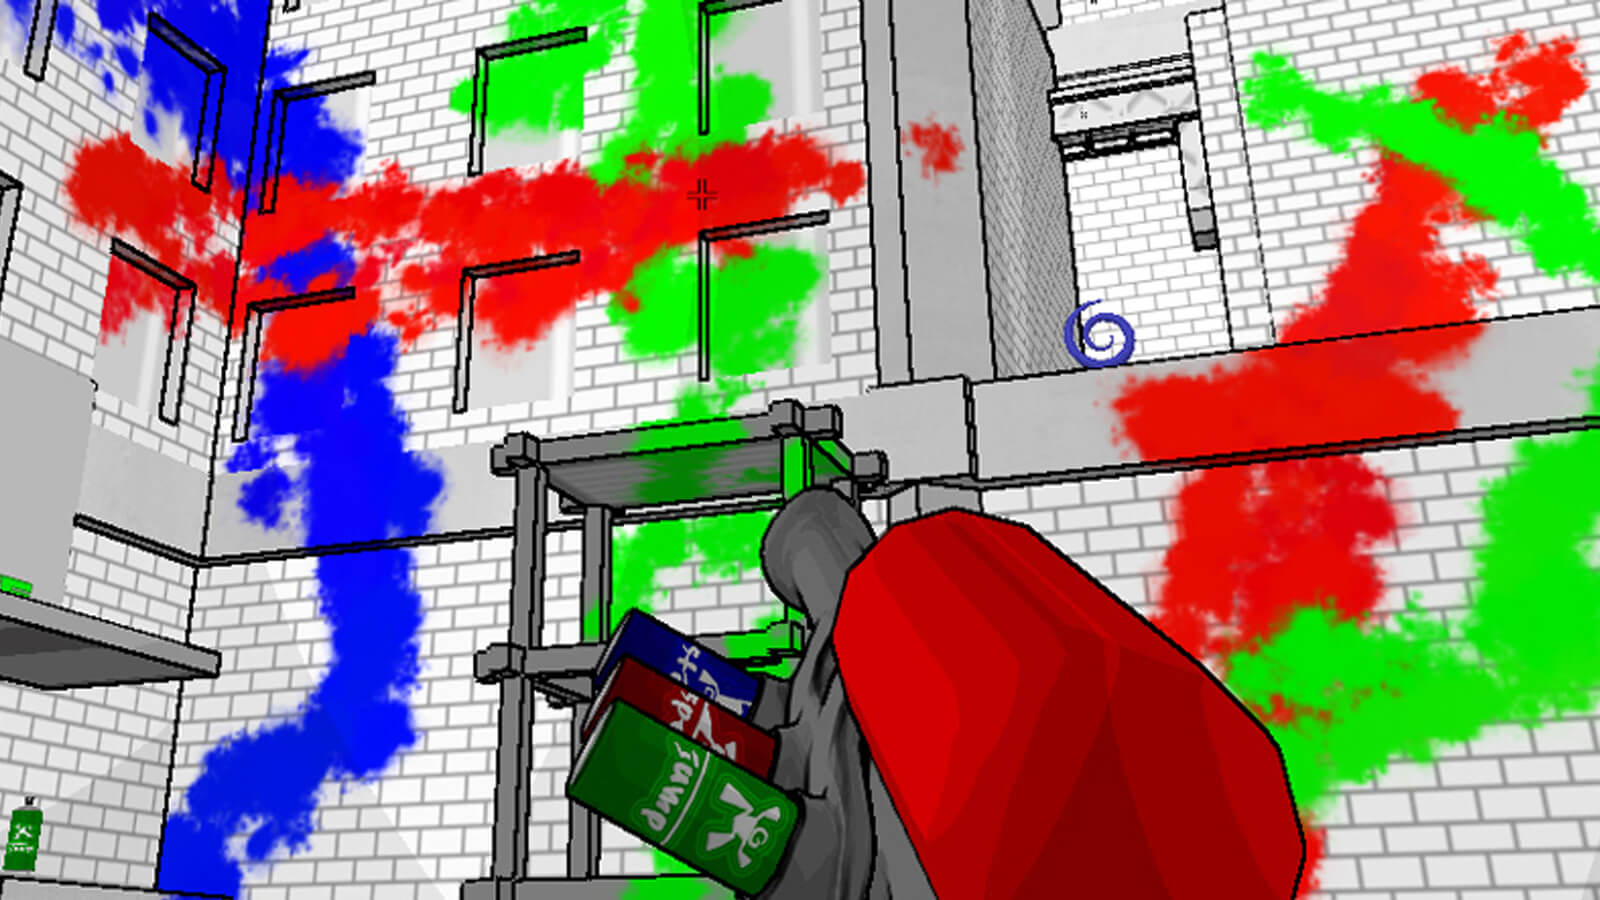 A spray paint gun points at a grey brick building covered in splotches of blue, red and green paint. 